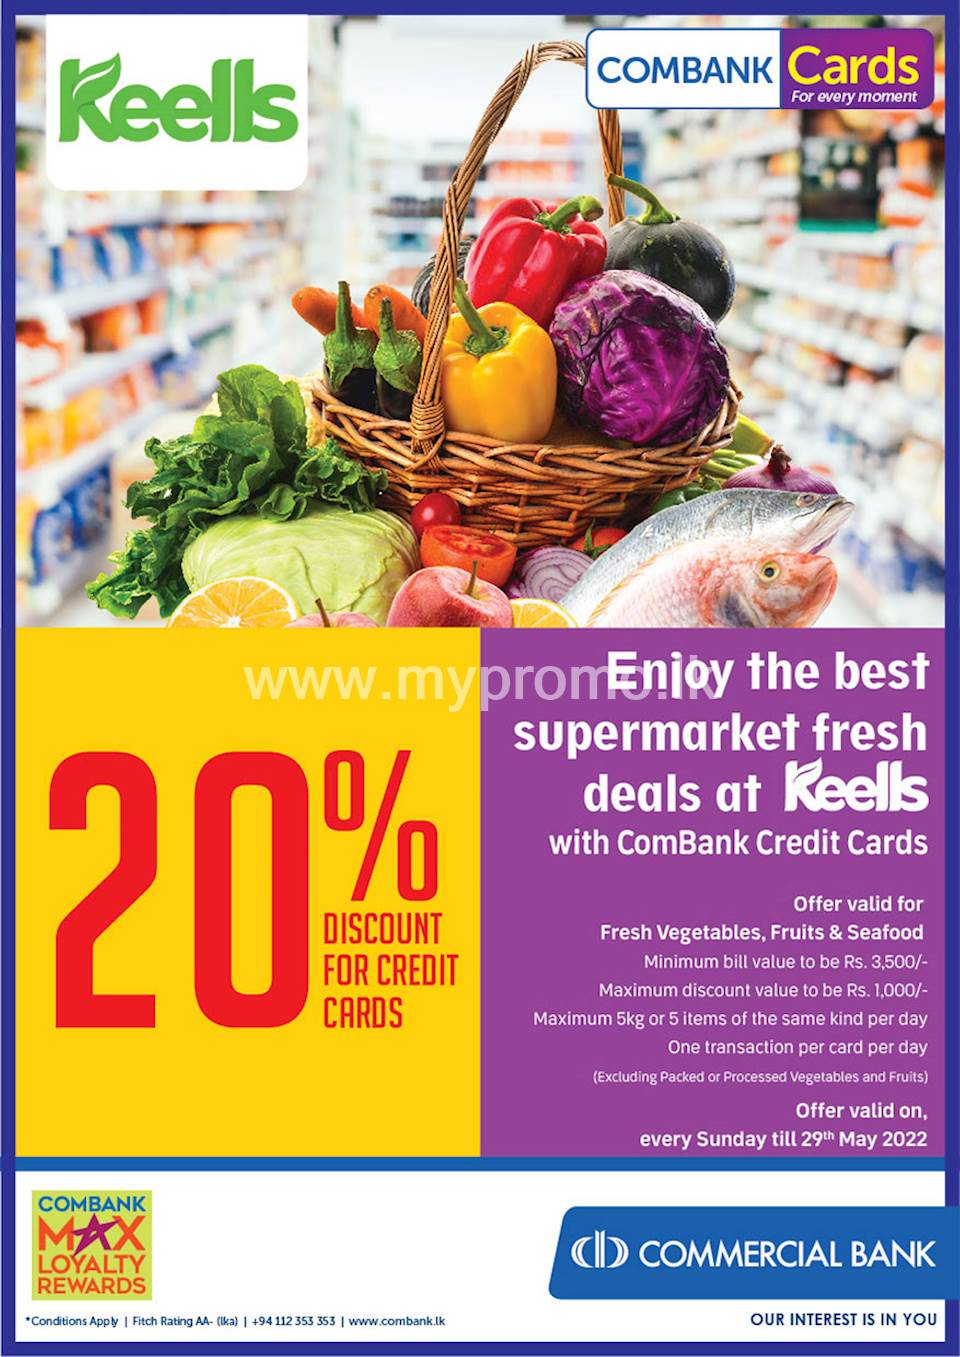 Enjoy the best supermarket fresh deals at Keells with ComBank Credit Cards